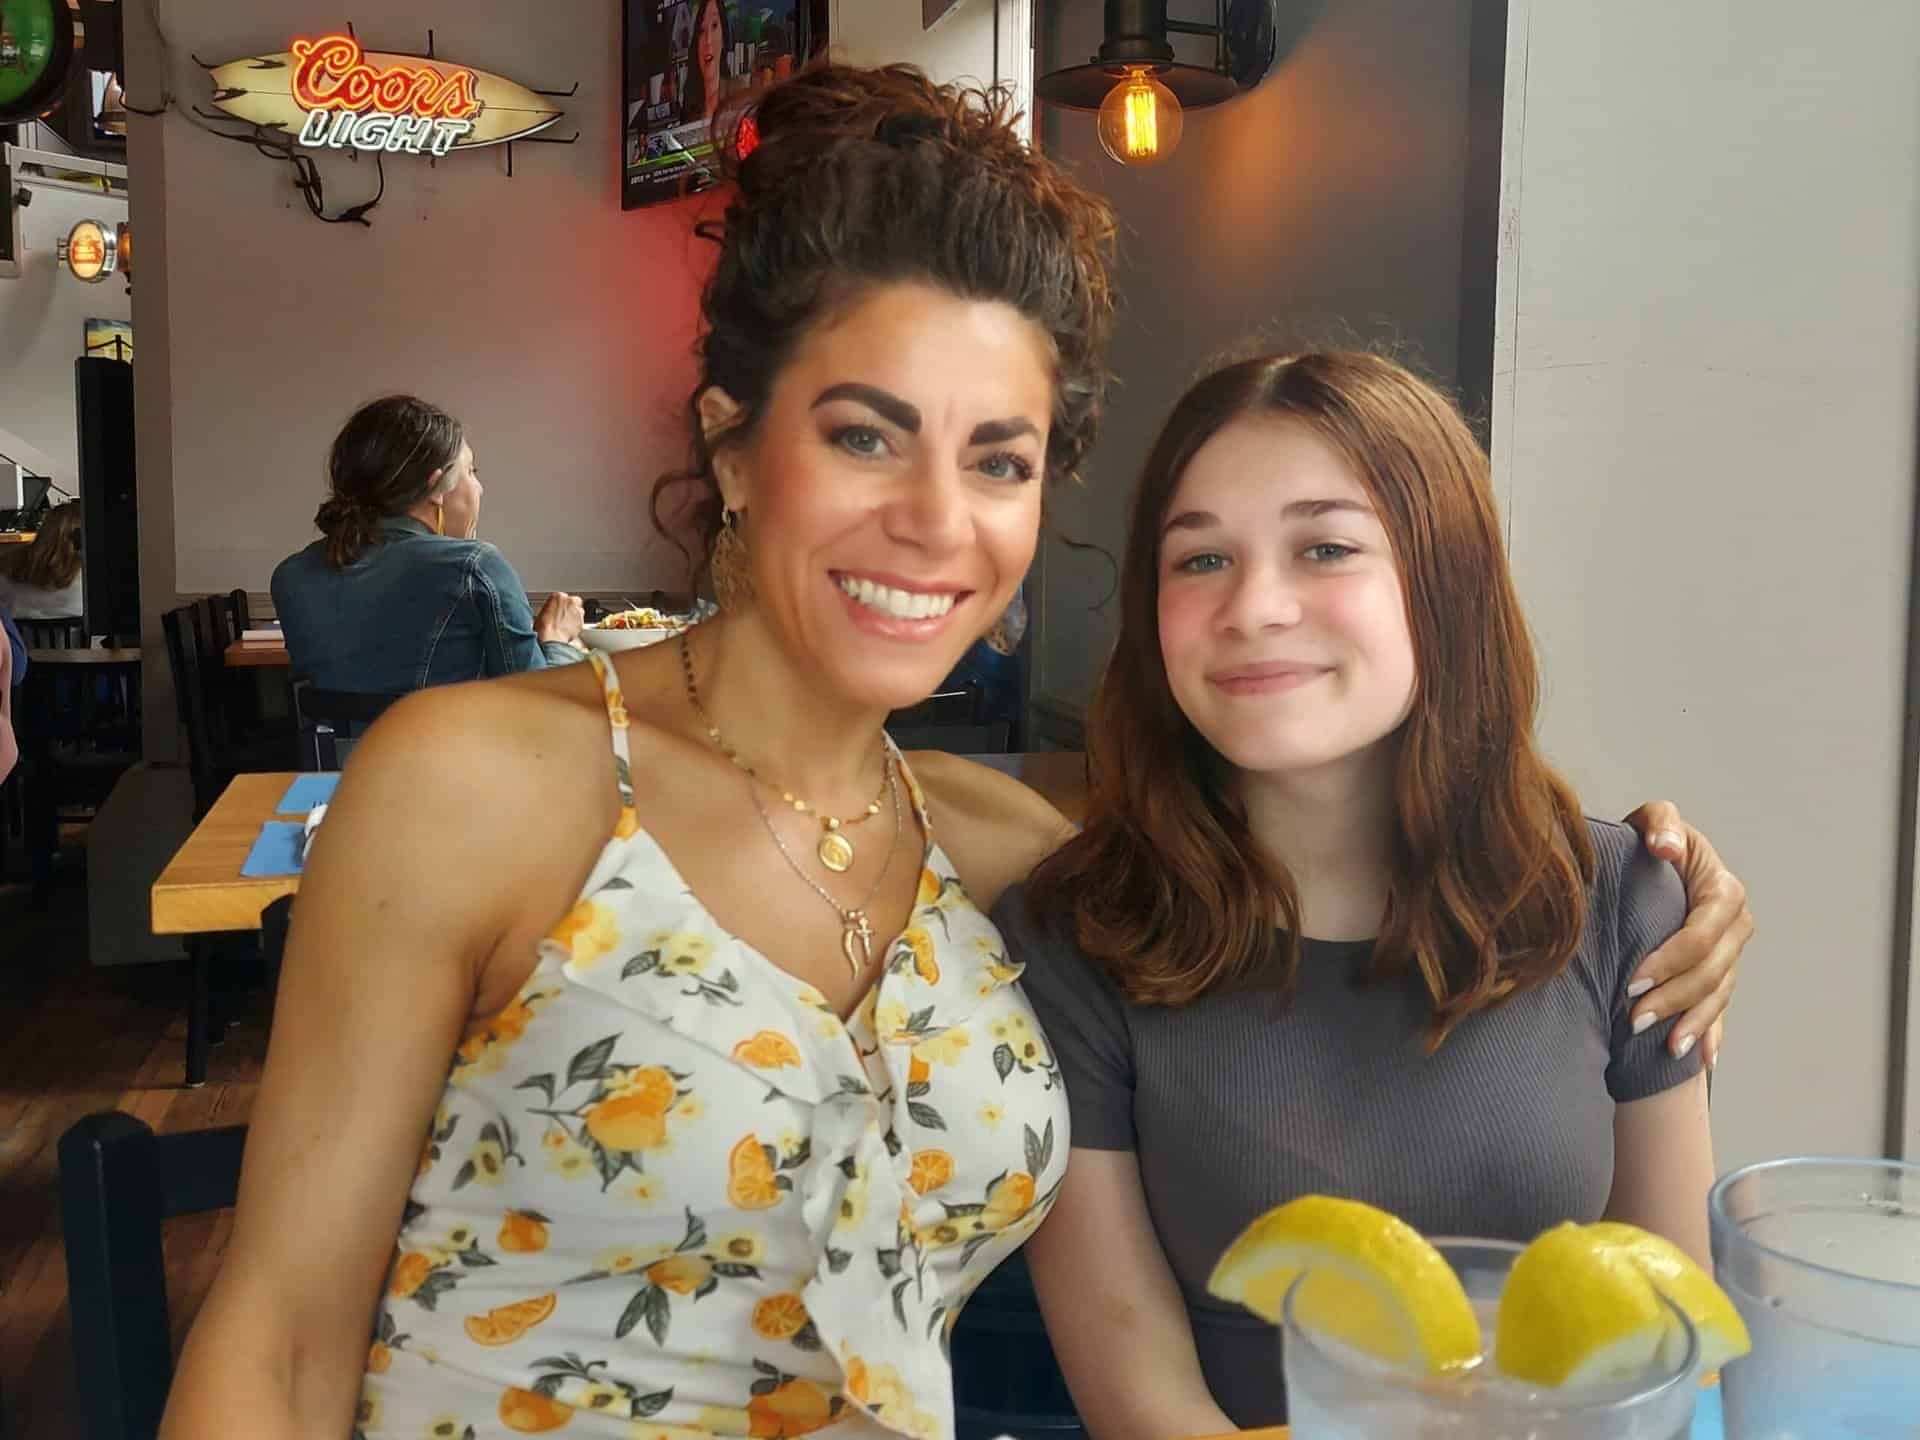 Woman and girl smiling at a restaurant table